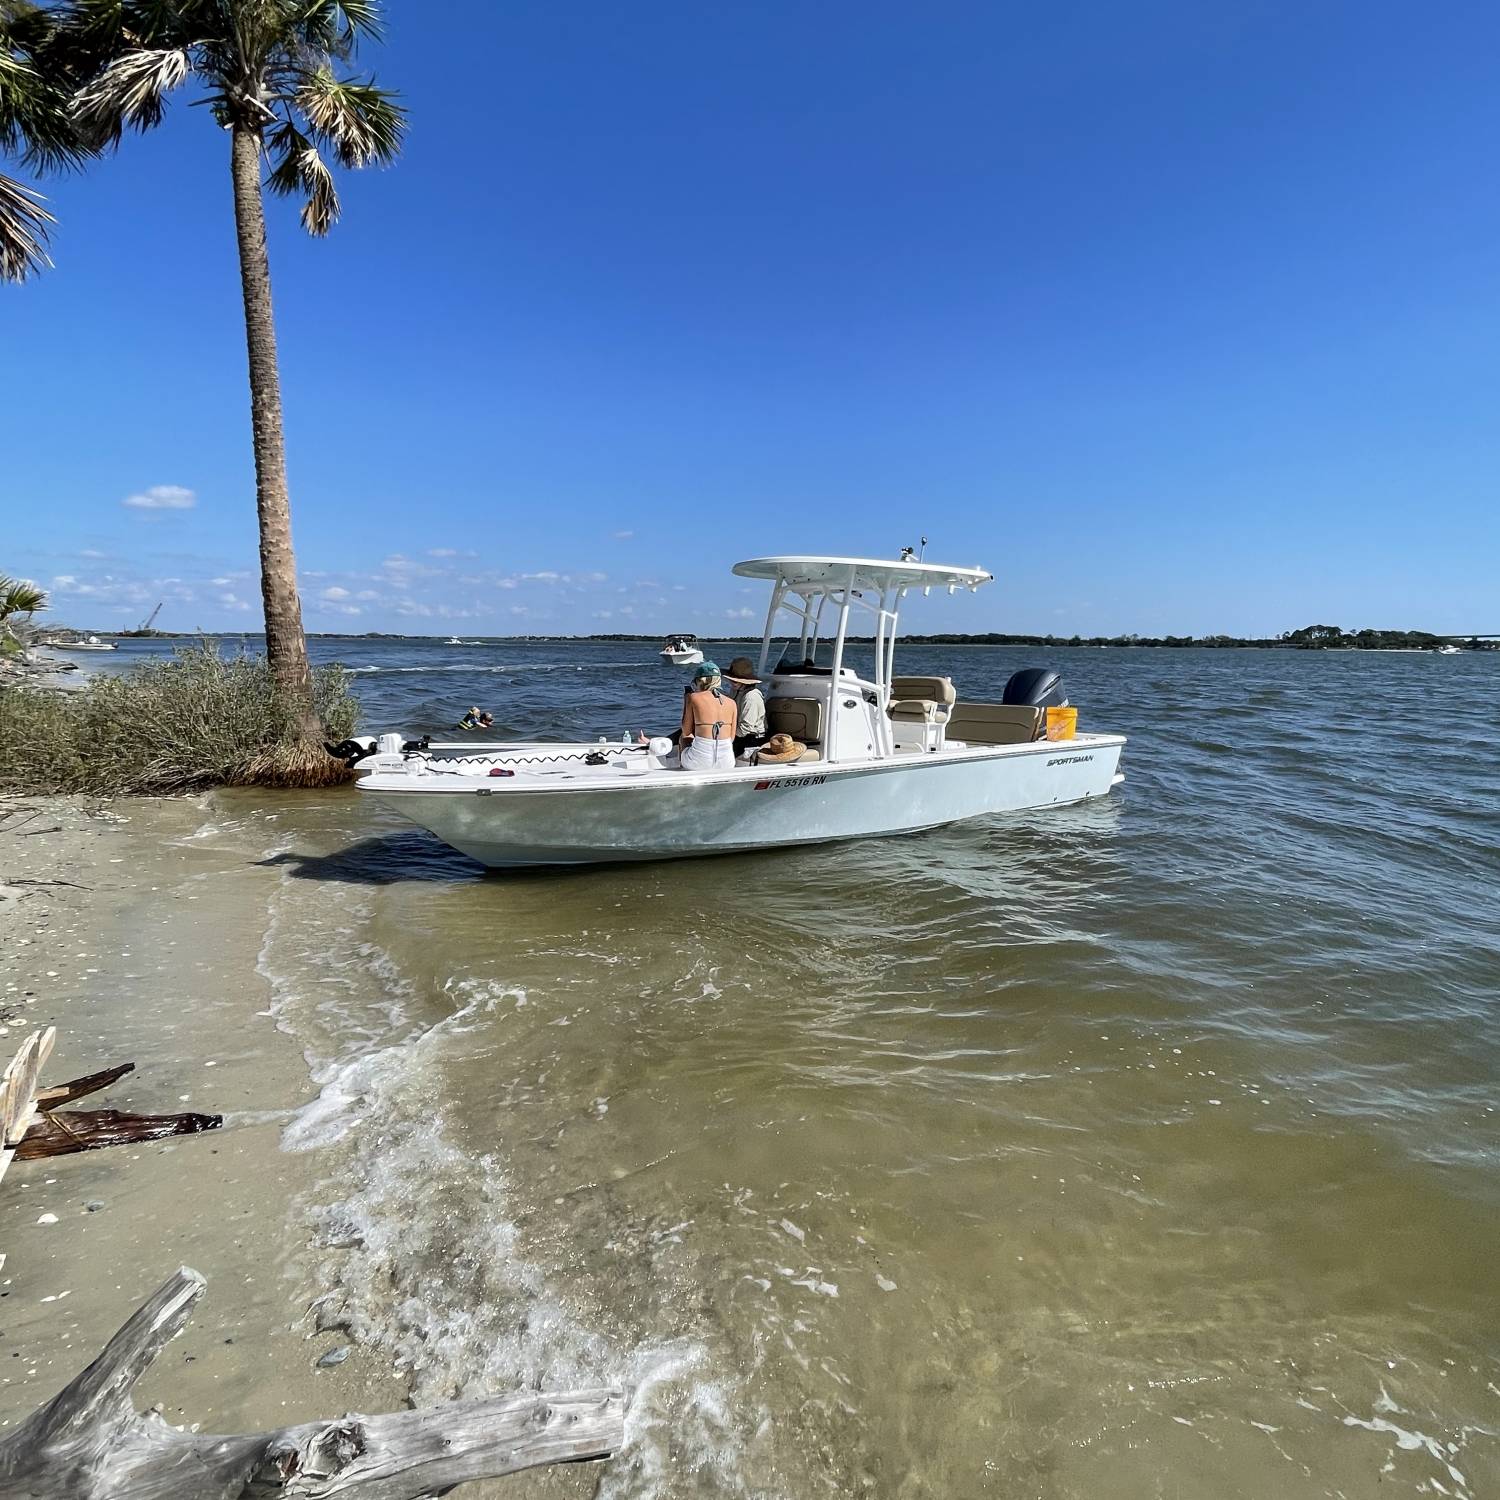 Title: Shark tooth island Sunday funday - On board their Sportsman Masters 247 Bay Boat - Location: Jacksonville, FL. Participating in the Photo Contest #SportsmanAugust